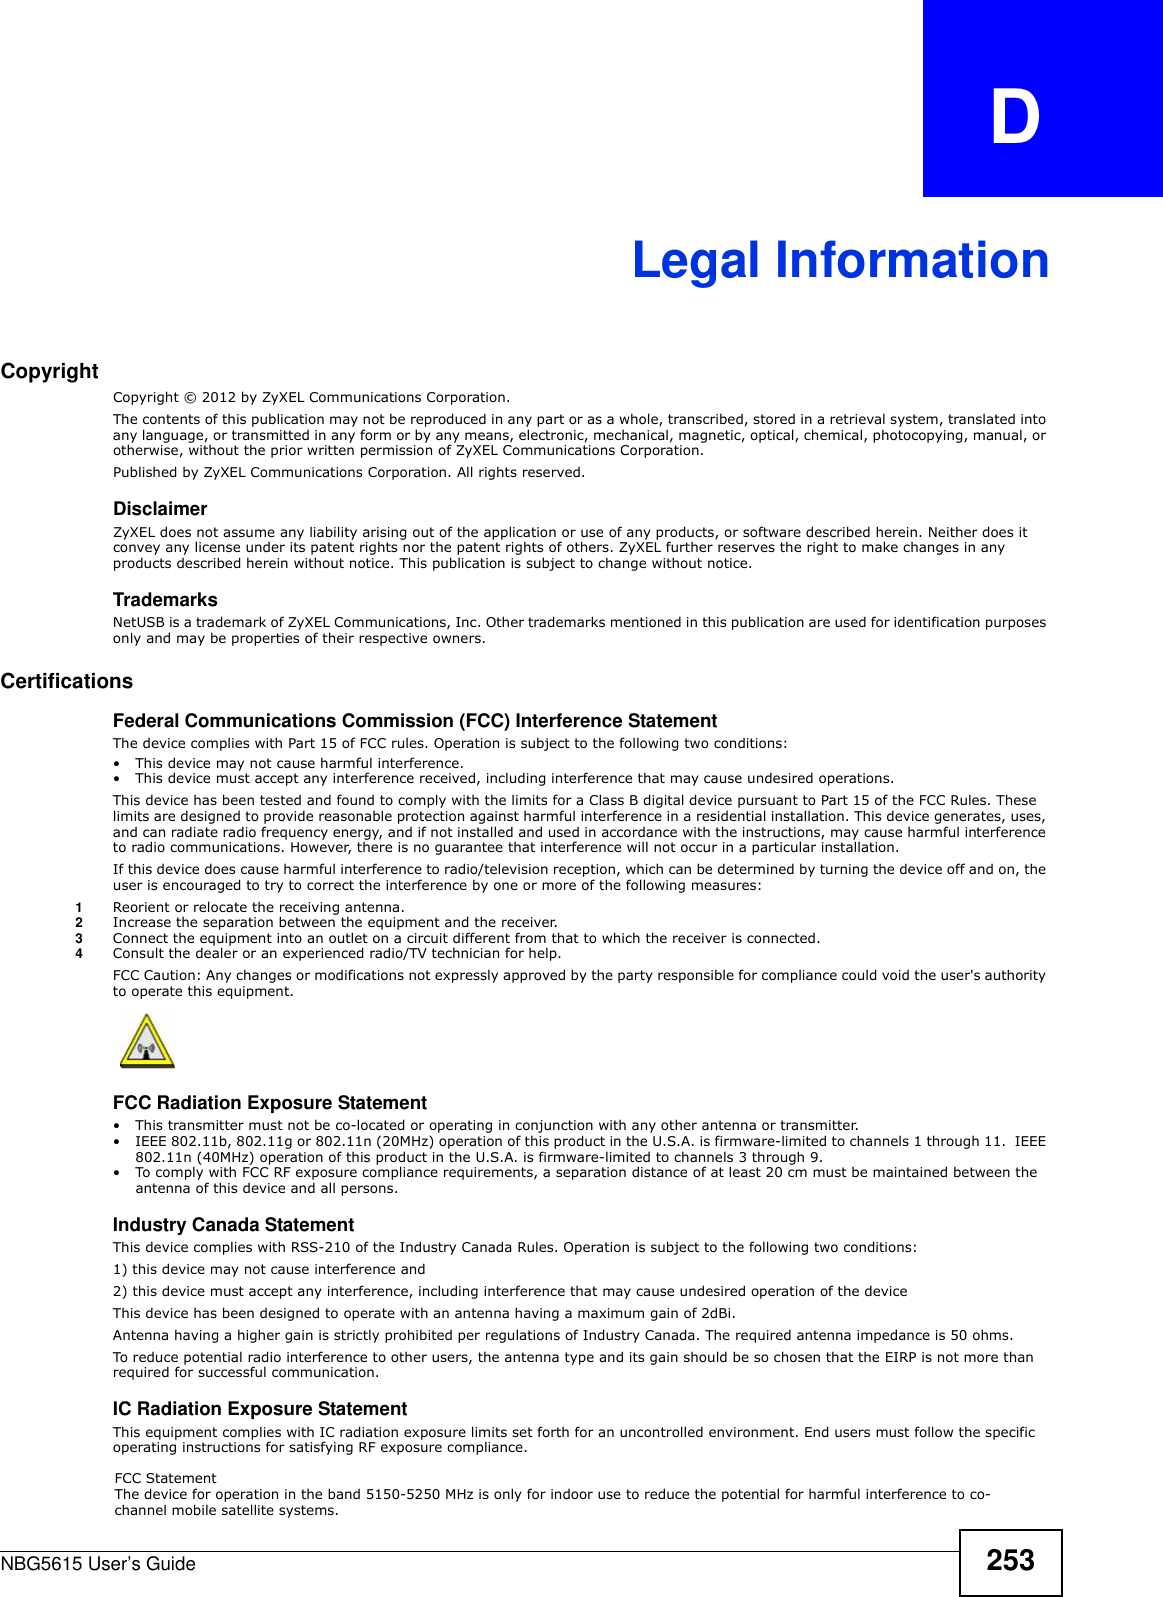 NBG5615 User’s Guide 253APPENDIX   DLegal InformationCopyrightCopyright © 2012 by ZyXEL Communications Corporation.The contents of this publication may not be reproduced in any part or as a whole, transcribed, stored in a retrieval system, translated into any language, or transmitted in any form or by any means, electronic, mechanical, magnetic, optical, chemical, photocopying, manual, or otherwise, without the prior written permission of ZyXEL Communications Corporation.Published by ZyXEL Communications Corporation. All rights reserved.DisclaimerZyXEL does not assume any liability arising out of the application or use of any products, or software described herein. Neither does it convey any license under its patent rights nor the patent rights of others. ZyXEL further reserves the right to make changes in any products described herein without notice. This publication is subject to change without notice.TrademarksNetUSB is a trademark of ZyXEL Communications, Inc. Other trademarks mentioned in this publication are used for identification purposes only and may be properties of their respective owners.Certifications  Federal Communications Commission (FCC) Interference Statement The device complies with Part 15 of FCC rules. Operation is subject to the following two conditions:• This device may not cause harmful interference.• This device must accept any interference received, including interference that may cause undesired operations.This device has been tested and found to comply with the limits for a Class B digital device pursuant to Part 15 of the FCC Rules. These limits are designed to provide reasonable protection against harmful interference in a residential installation. This device generates, uses, and can radiate radio frequency energy, and if not installed and used in accordance with the instructions, may cause harmful interference to radio communications. However, there is no guarantee that interference will not occur in a particular installation.If this device does cause harmful interference to radio/television reception, which can be determined by turning the device off and on, the user is encouraged to try to correct the interference by one or more of the following measures:1Reorient or relocate the receiving antenna.2Increase the separation between the equipment and the receiver.3Connect the equipment into an outlet on a circuit different from that to which the receiver is connected.4Consult the dealer or an experienced radio/TV technician for help.FCC Caution: Any changes or modifications not expressly approved by the party responsible for compliance could void the user&apos;s authority to operate this equipment.FCC Radiation Exposure Statement • This transmitter must not be co-located or operating in conjunction with any other antenna or transmitter. • IEEE 802.11b, 802.11g or 802.11n (20MHz) operation of this product in the U.S.A. is firmware-limited to channels 1 through 11.  IEEE 802.11n (40MHz) operation of this product in the U.S.A. is firmware-limited to channels 3 through 9.• To comply with FCC RF exposure compliance requirements, a separation distance of at least 20 cm must be maintained between the antenna of this device and all persons. Industry Canada StatementThis device complies with RSS-210 of the Industry Canada Rules. Operation is subject to the following two conditions:1) this device may not cause interference and2) this device must accept any interference, including interference that may cause undesired operation of the deviceThis device has been designed to operate with an antenna having a maximum gain of 2dBi.Antenna having a higher gain is strictly prohibited per regulations of Industry Canada. The required antenna impedance is 50 ohms.To reduce potential radio interference to other users, the antenna type and its gain should be so chosen that the EIRP is not more than required for successful communication.IC Radiation Exposure Statement This equipment complies with IC radiation exposure limits set forth for an uncontrolled environment. End users must follow the specific operating instructions for satisfying RF exposure compliance.                                        FCC Statement                         The device for operation in the band 5150-5250 MHz is only for indoor use to reduce the potential for harmful interference to co-                        channel mobile satellite systems.  